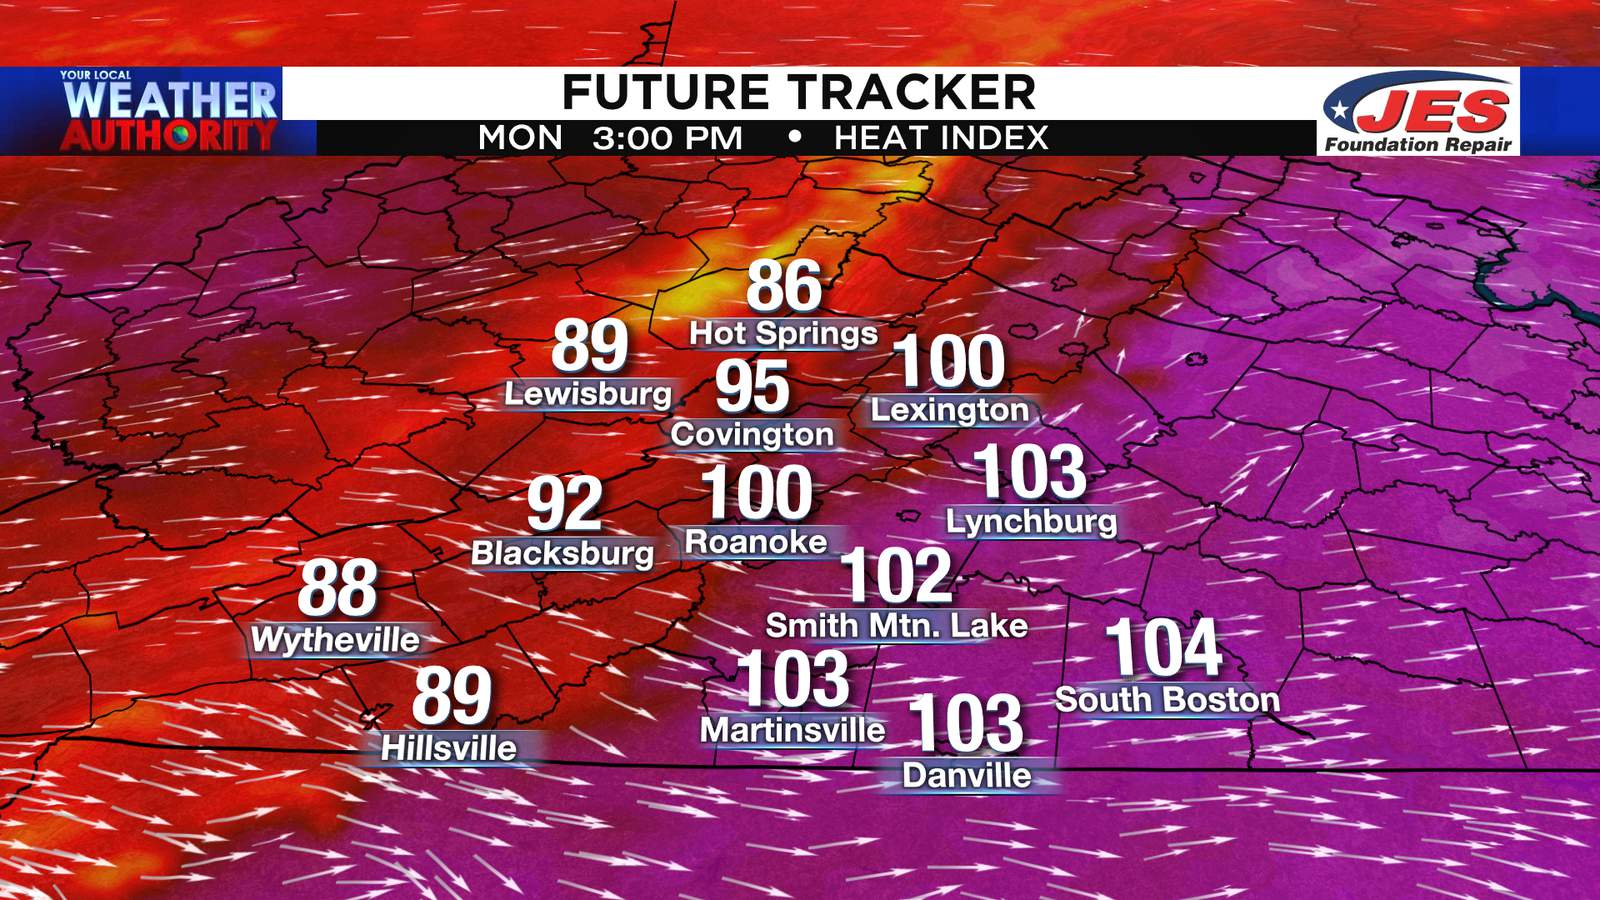 Another heat advisory in effect Monday; heat index exceeds 100 for many